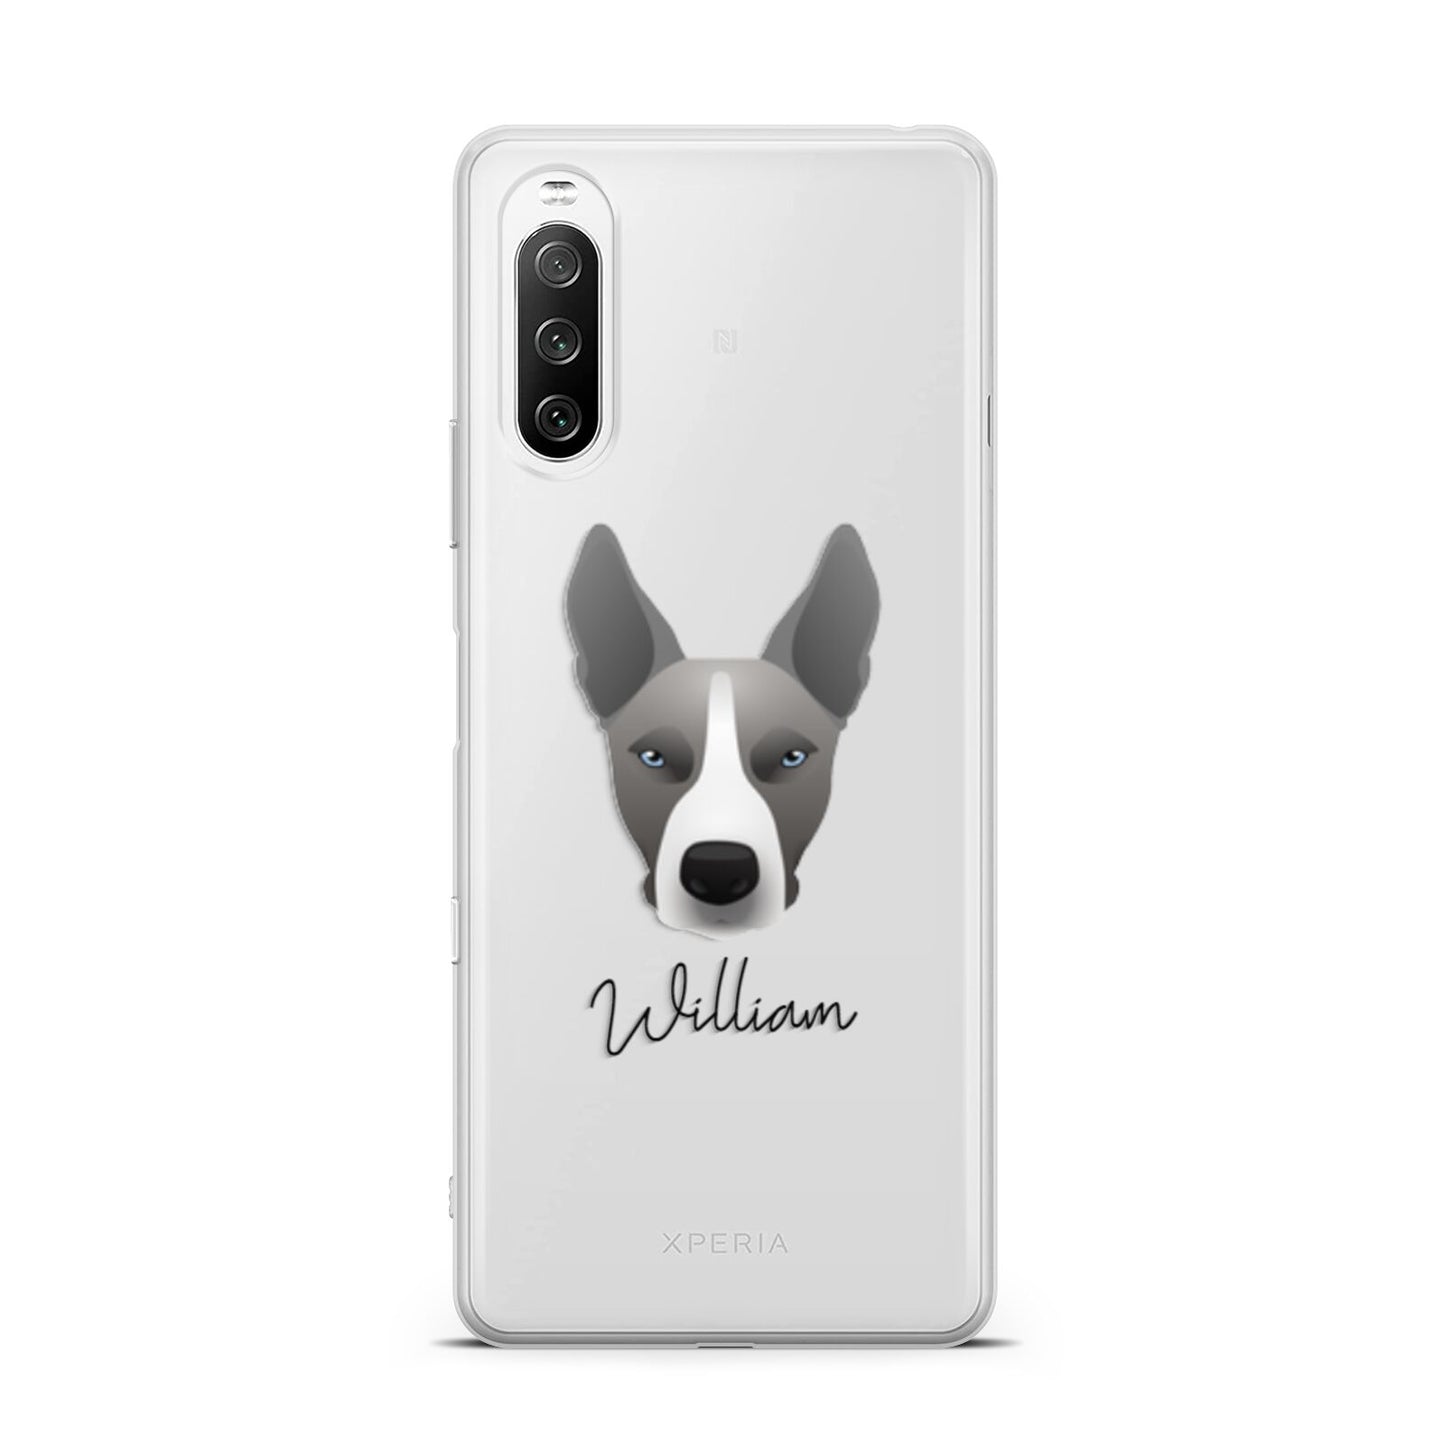 Pitsky Personalised Sony Xperia 10 III Case